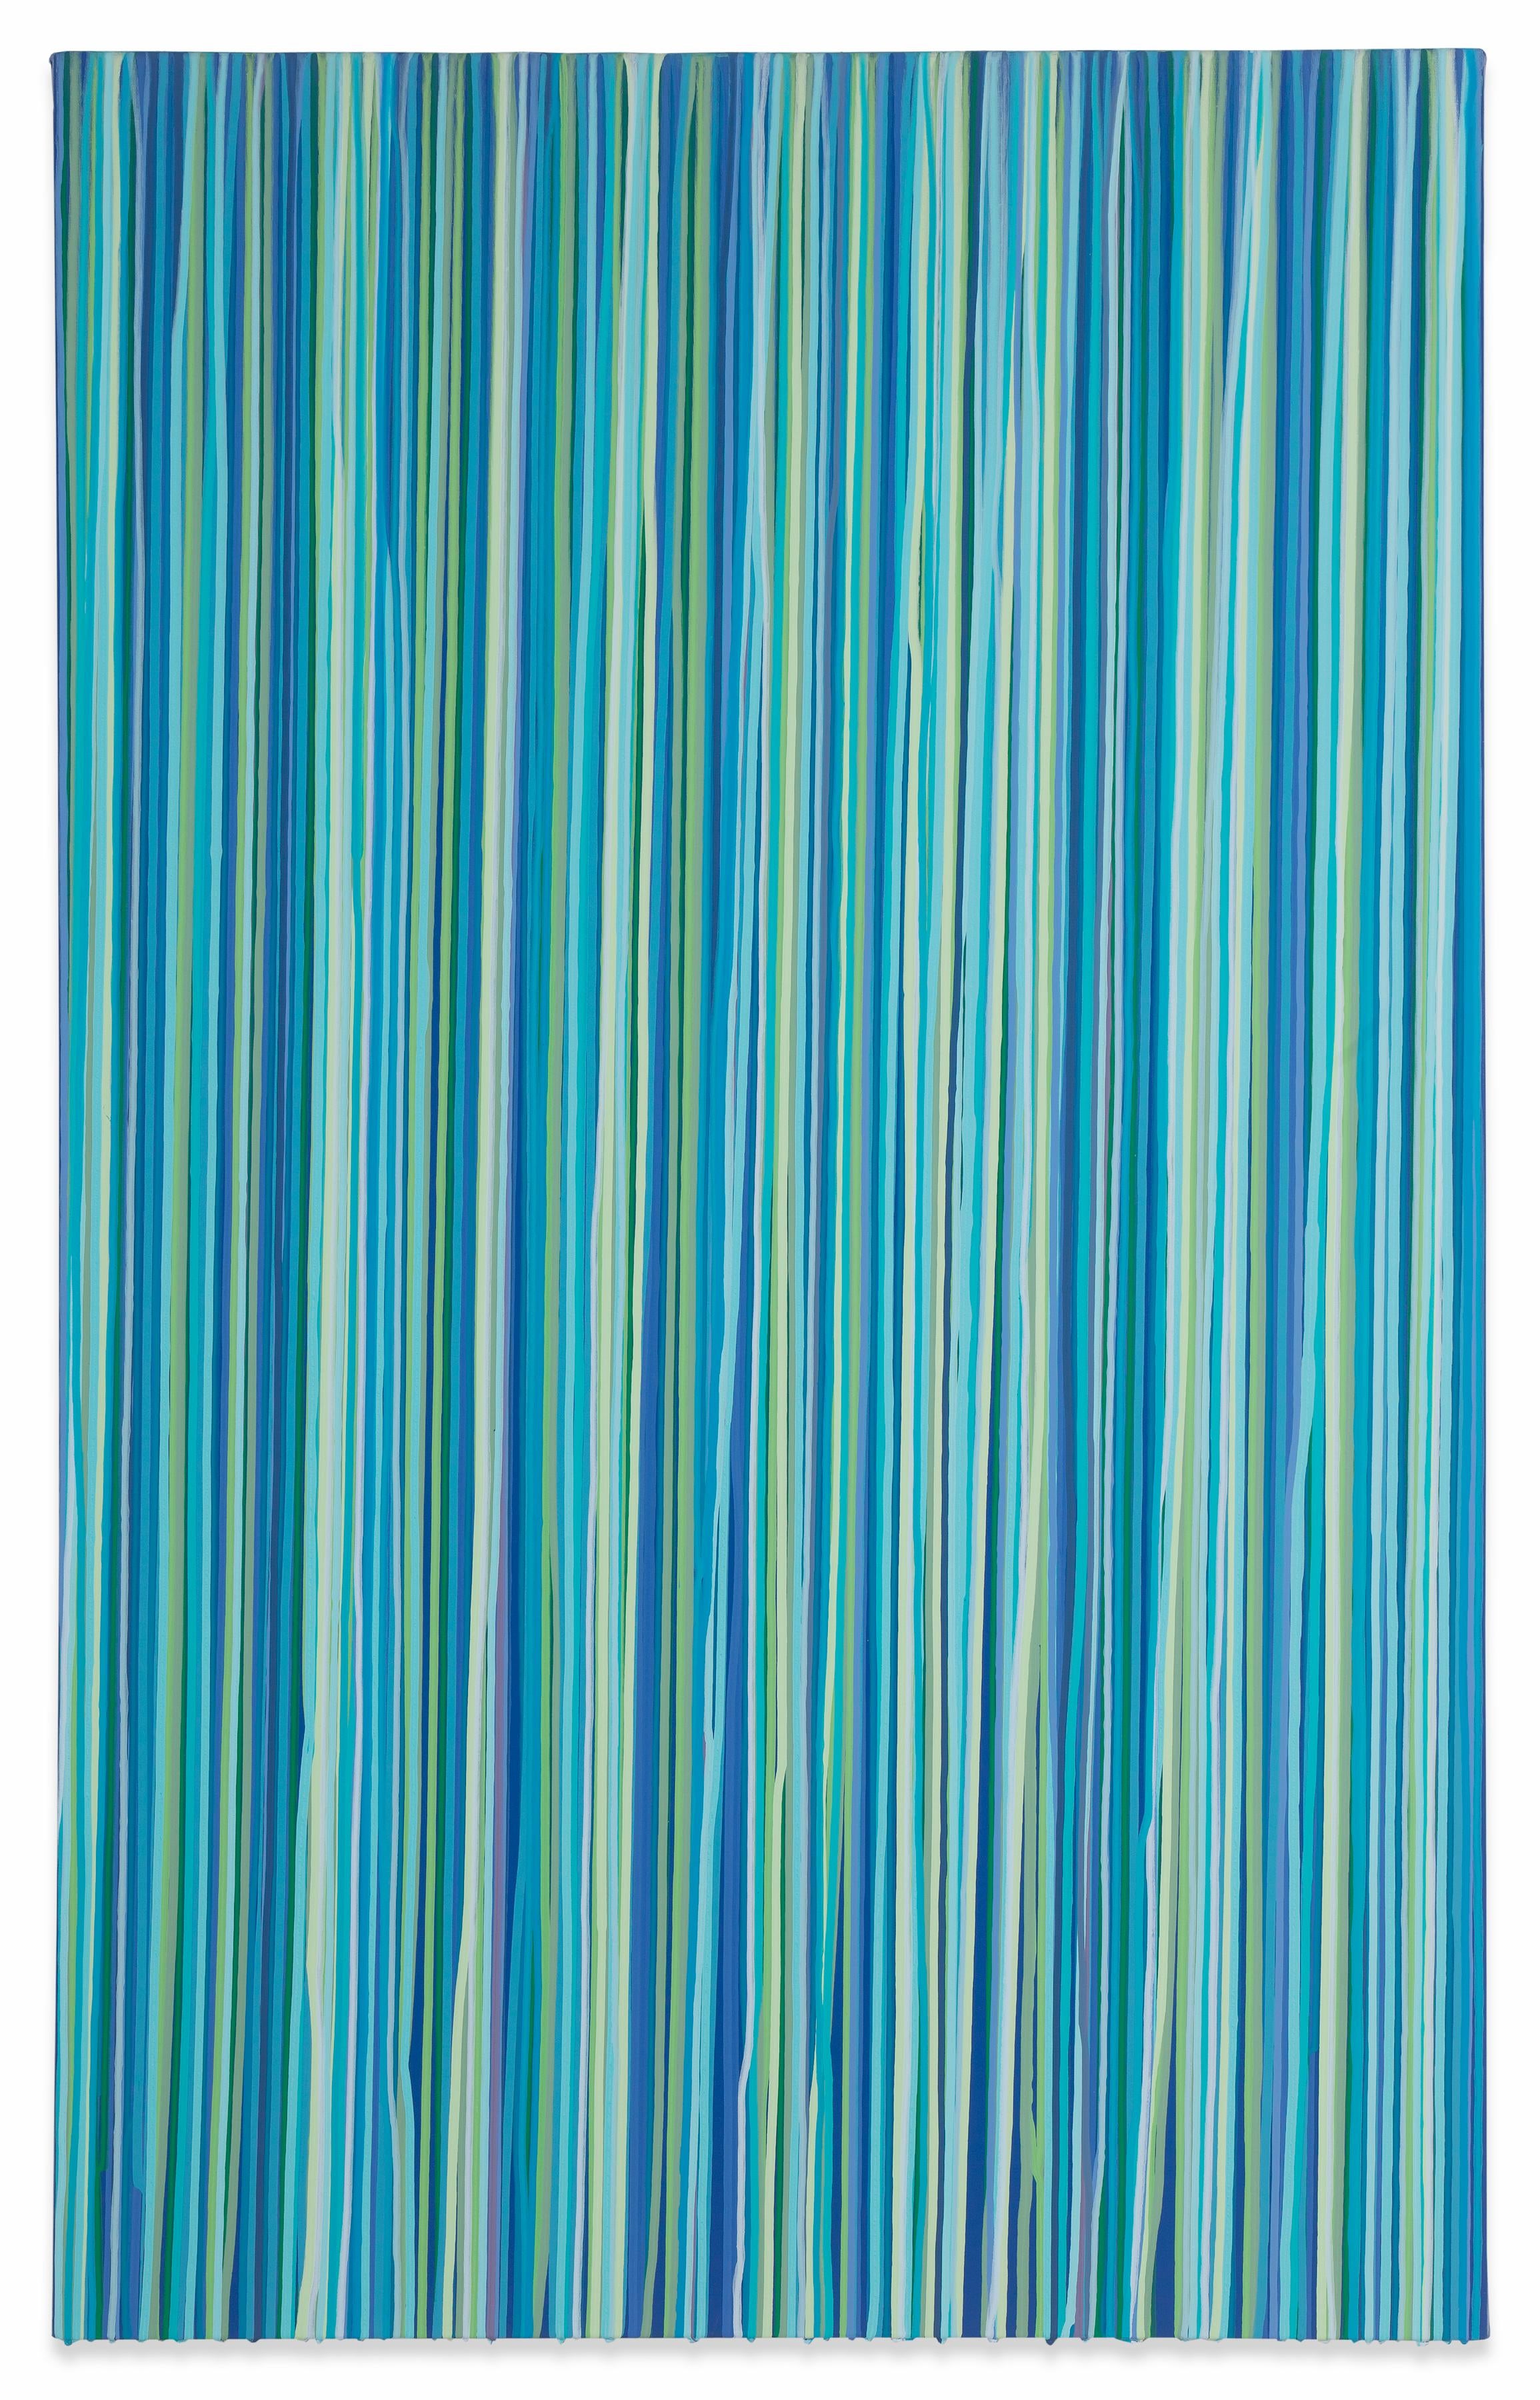 John Guthrie Abstract Painting - "Sugar Sugar" Contemporary Striped Painting in Blue and Green 